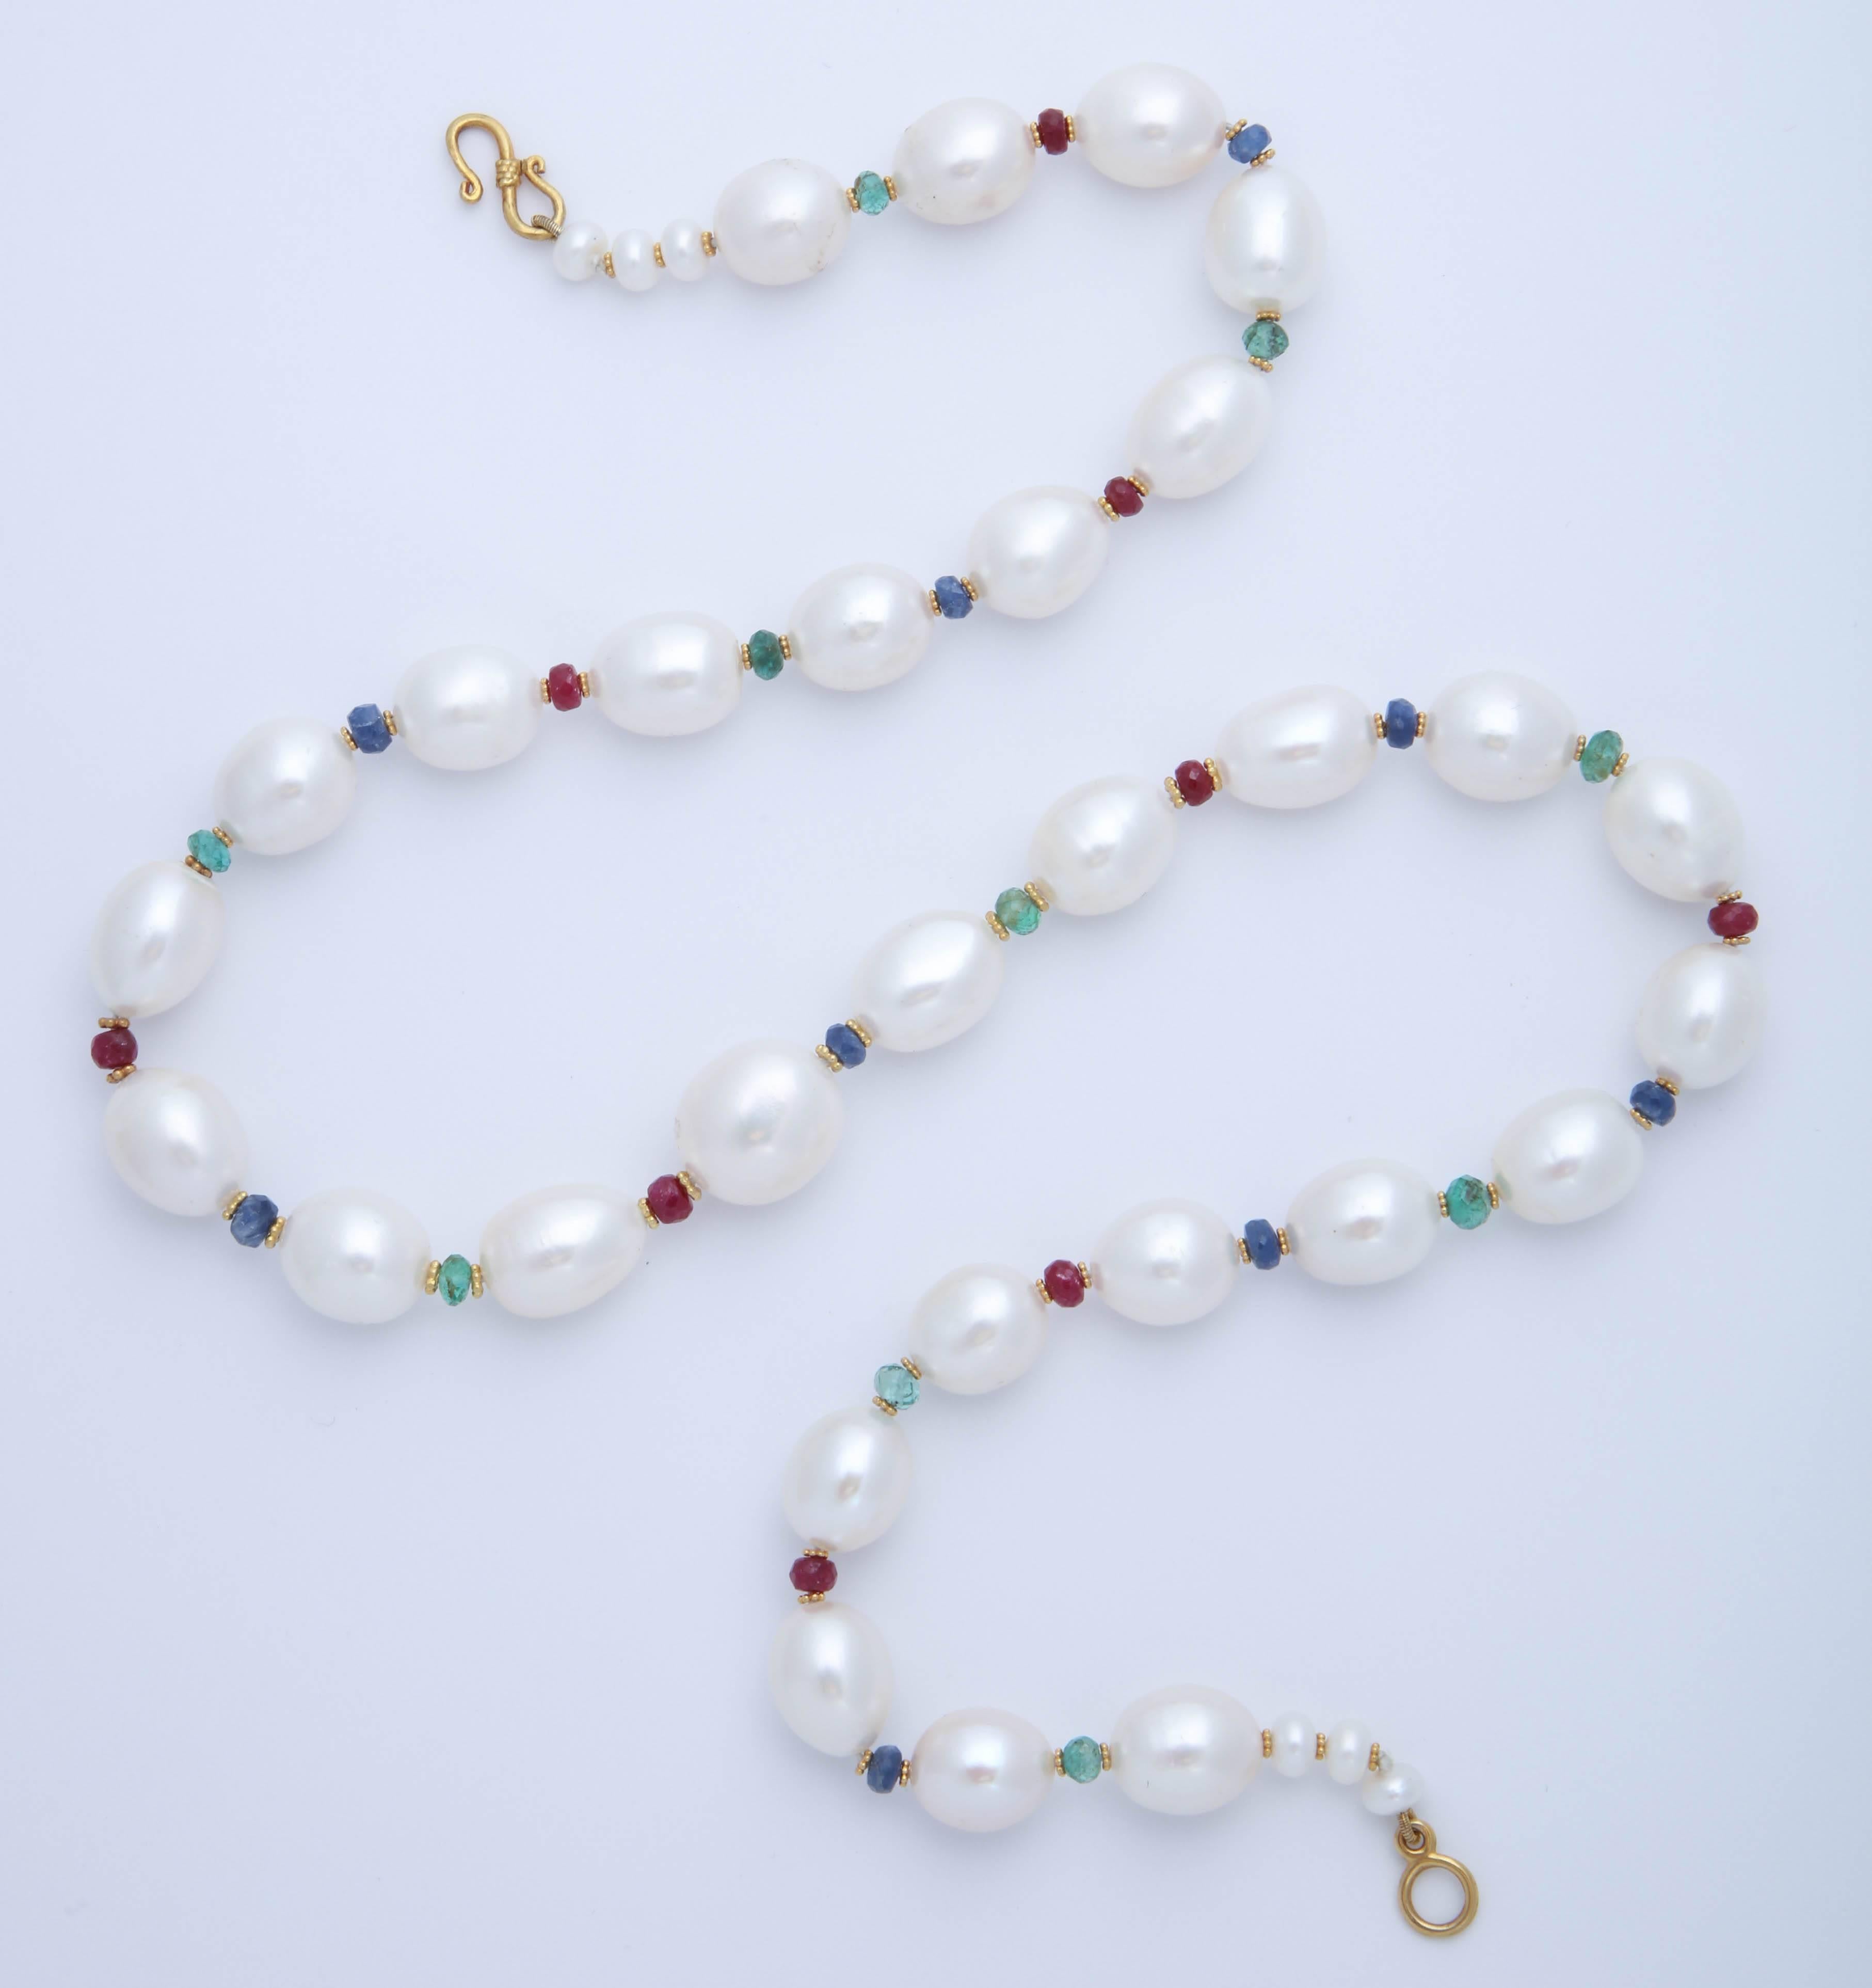 These beautiful oval freshwater pearls and interspersed with faceted emerald, ruby, and sapphire beads. On either side of the precious stone beads are 18 kt rosettes plated with 24 kt gold to give them a rich yellow color. The  necklace is finished